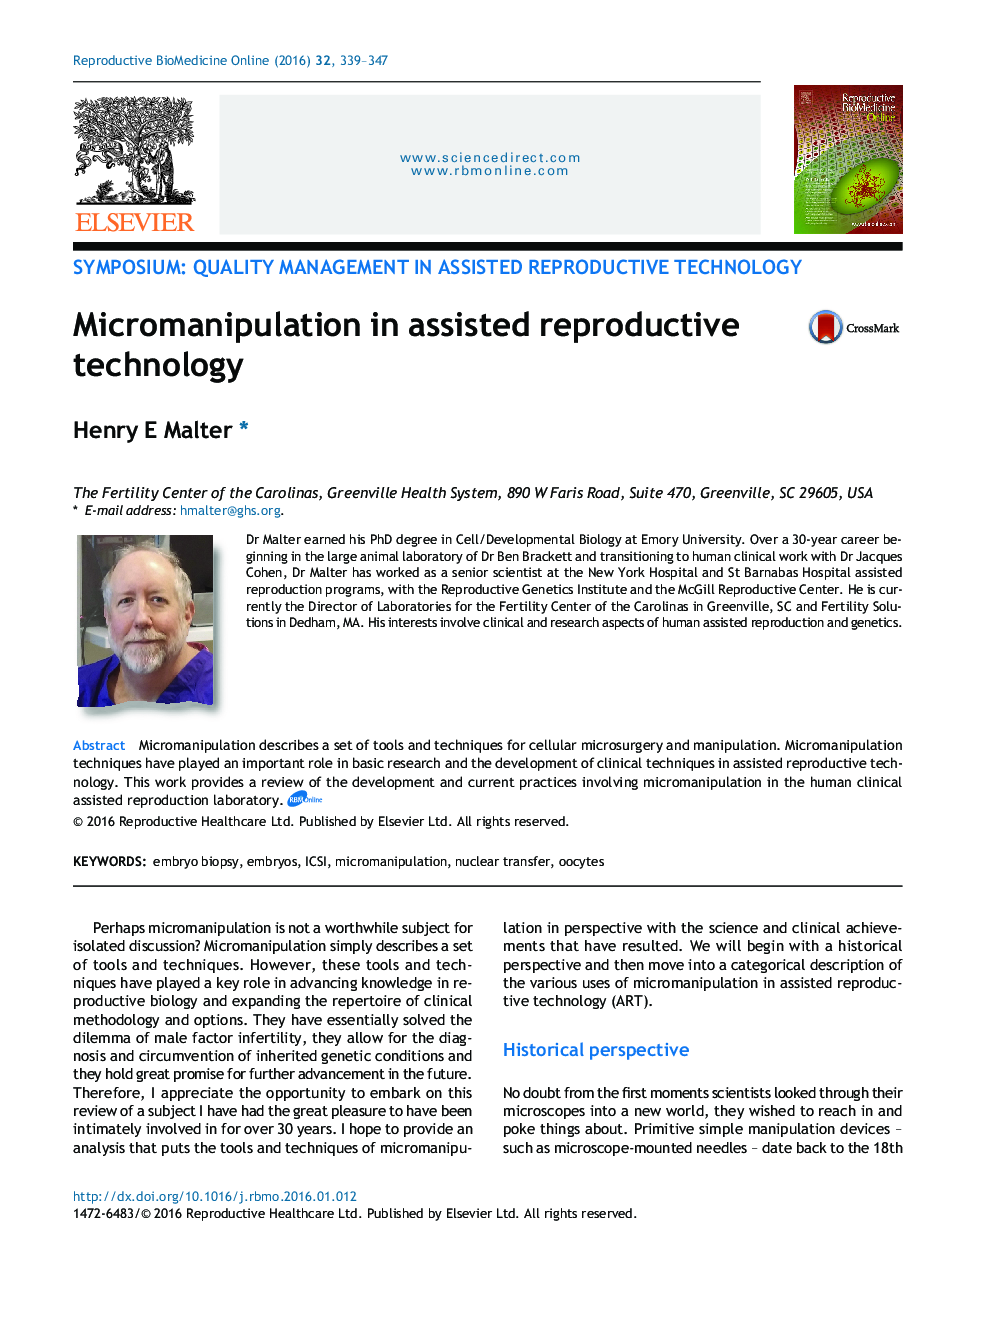 Micromanipulation in assisted reproductive technology